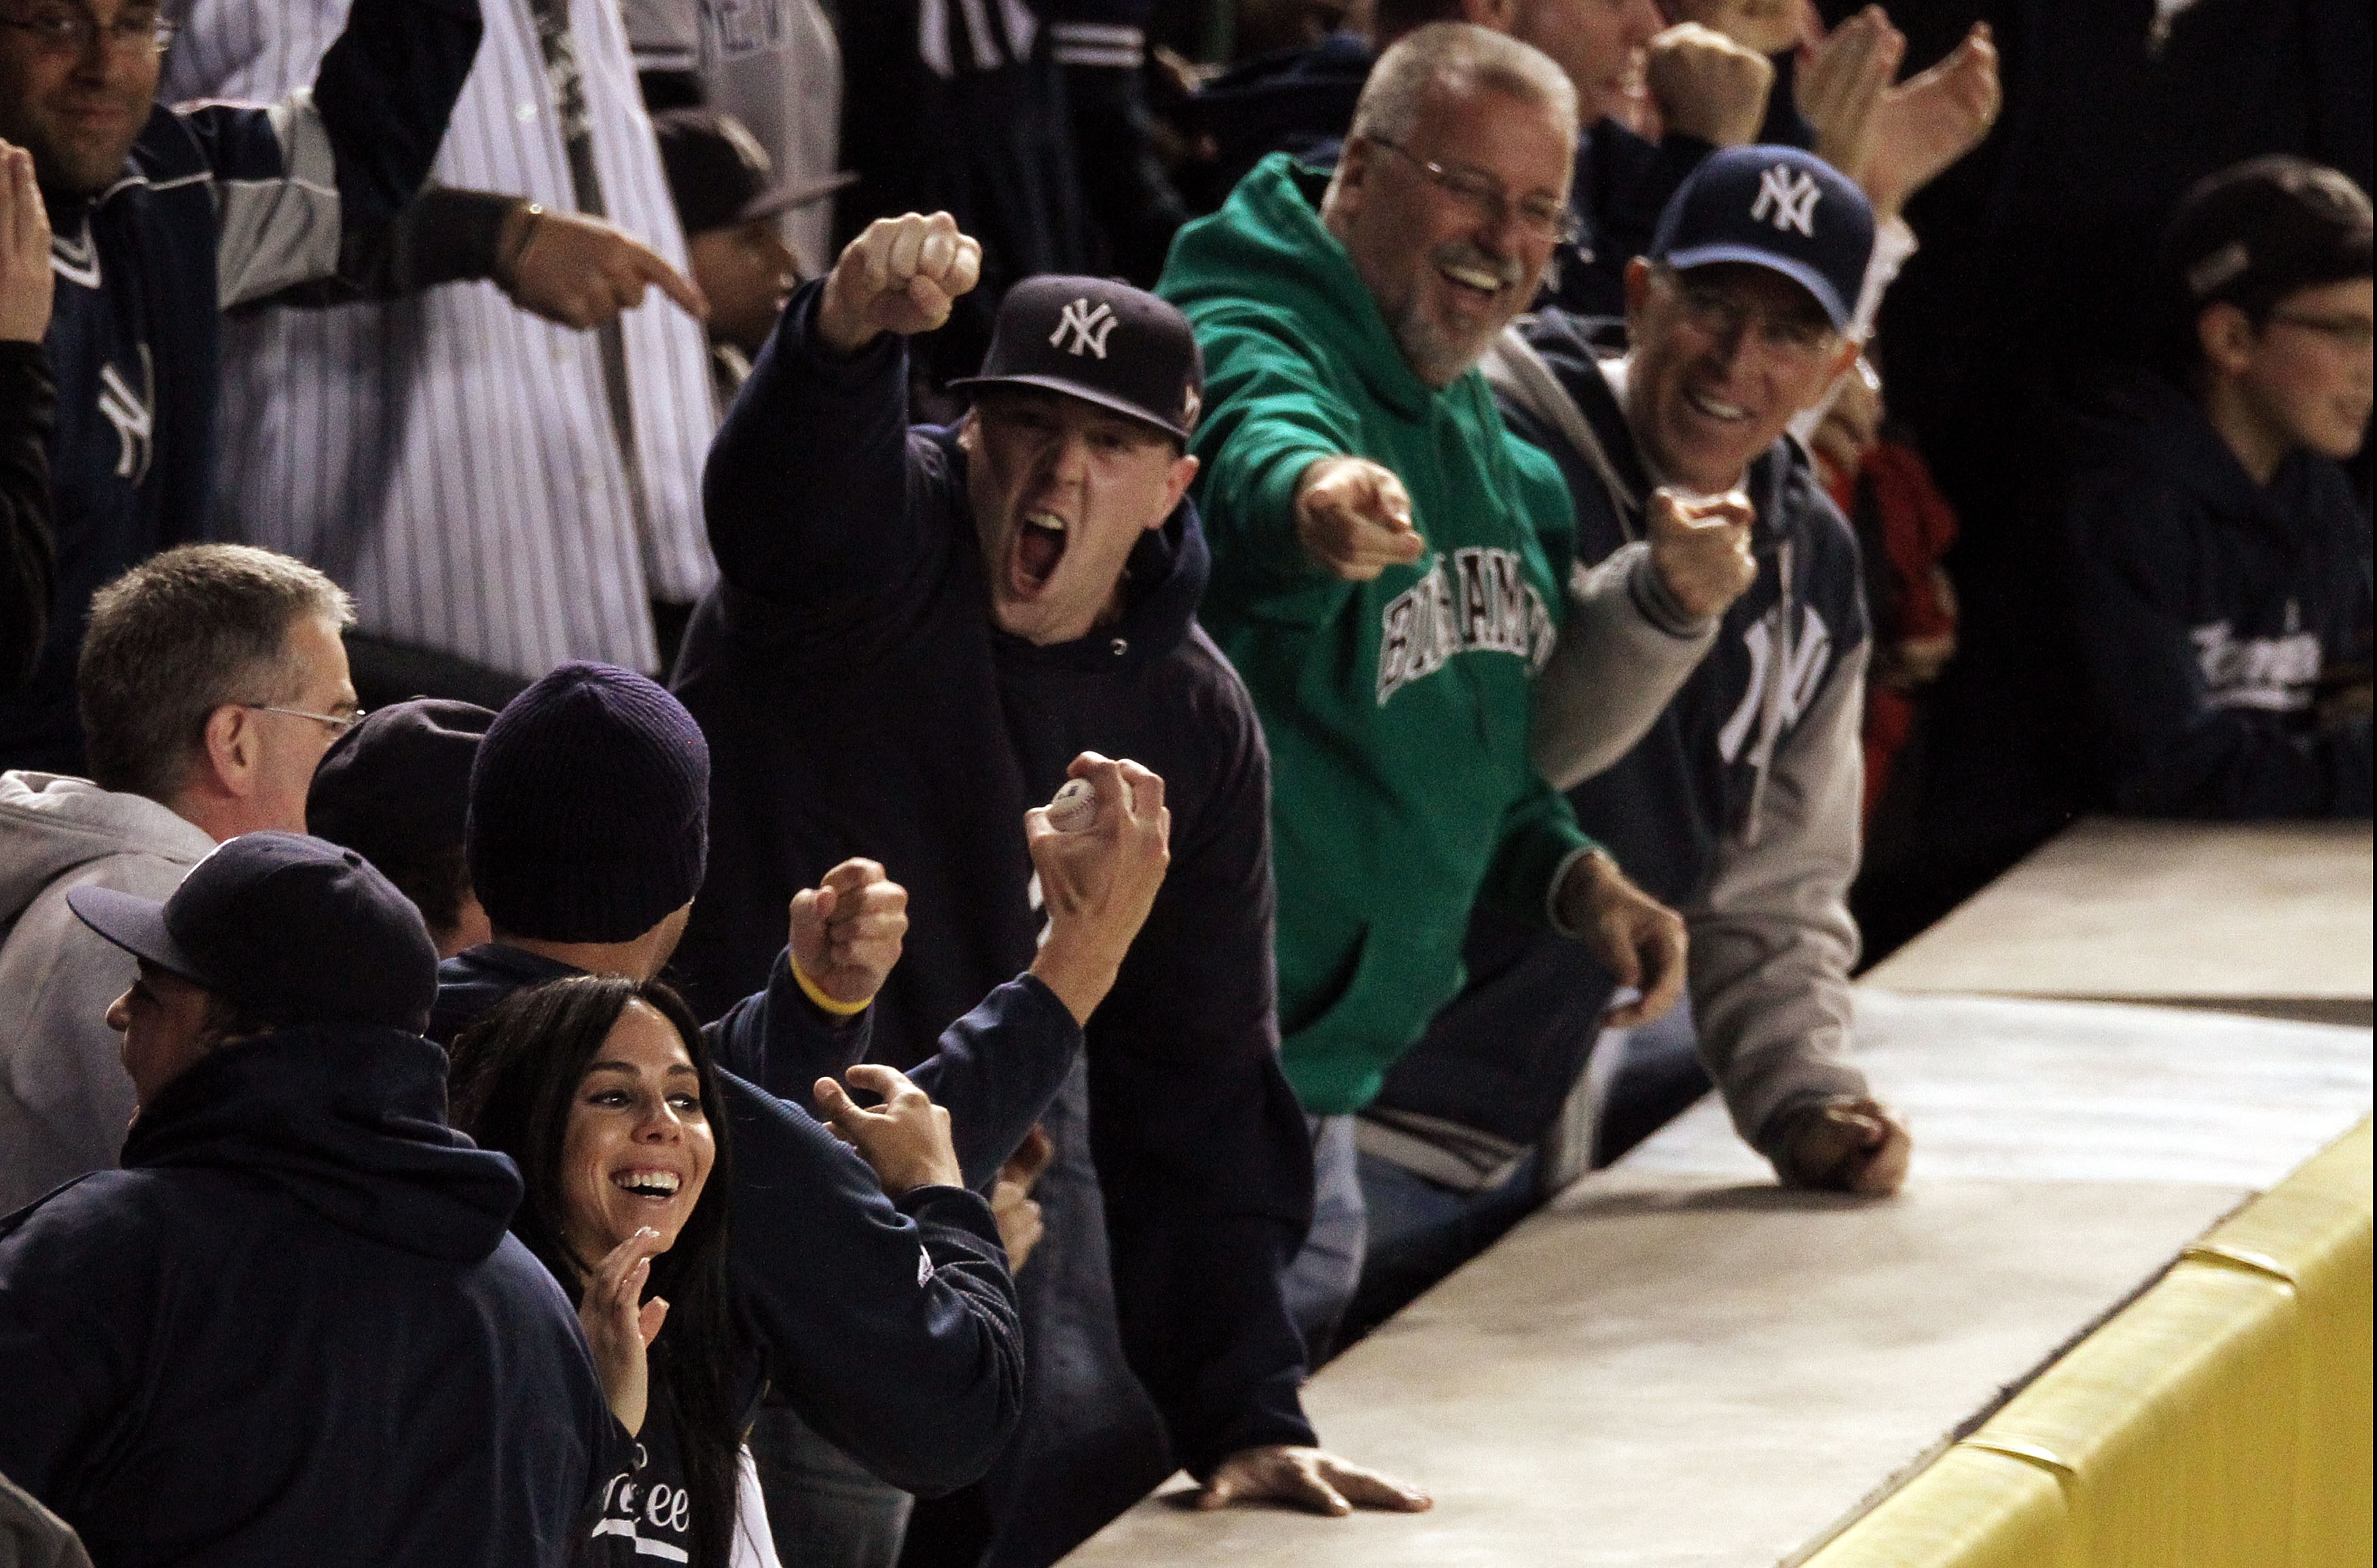 10 Reasons Rooting for the Yankees Isn't Fun, from the Eyes of a